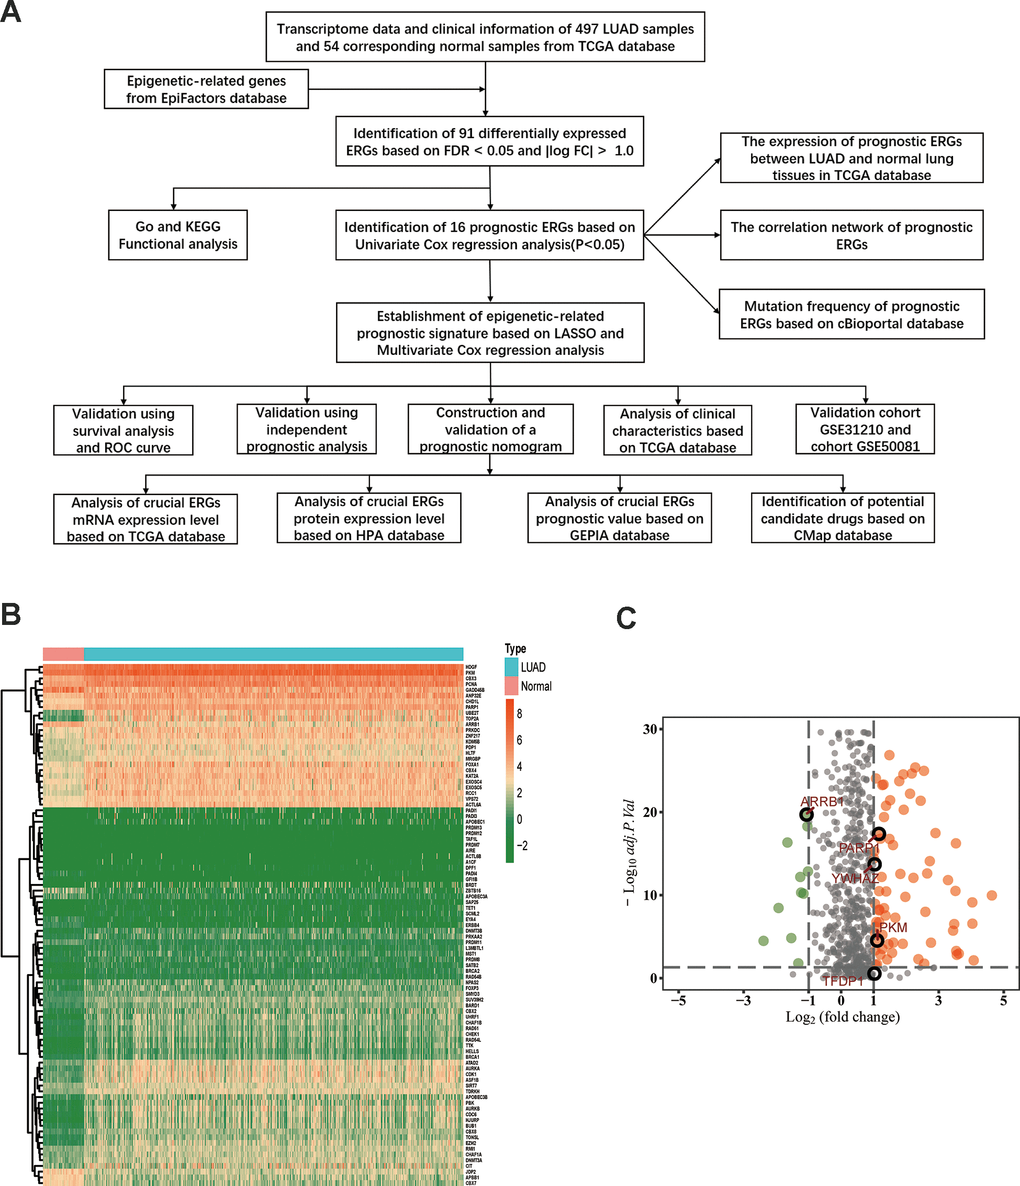 Differentially expressed epigenetic-related genes (ERGs) in lung adenocarcinoma (LUAD). (A) A flow diagram of the study. (B) Heatmap of ERGs between LUAD and nontumor tissues in TCGA database. The color from green to orange represents the progression from low expression to high expression. (C) Volcano plot of ERGs in TCGA database. The orange dots in the plot represents upregulated genes and green dots represents downregulated genes with statistical significance. Gray dots represent no differentially expressed genes.